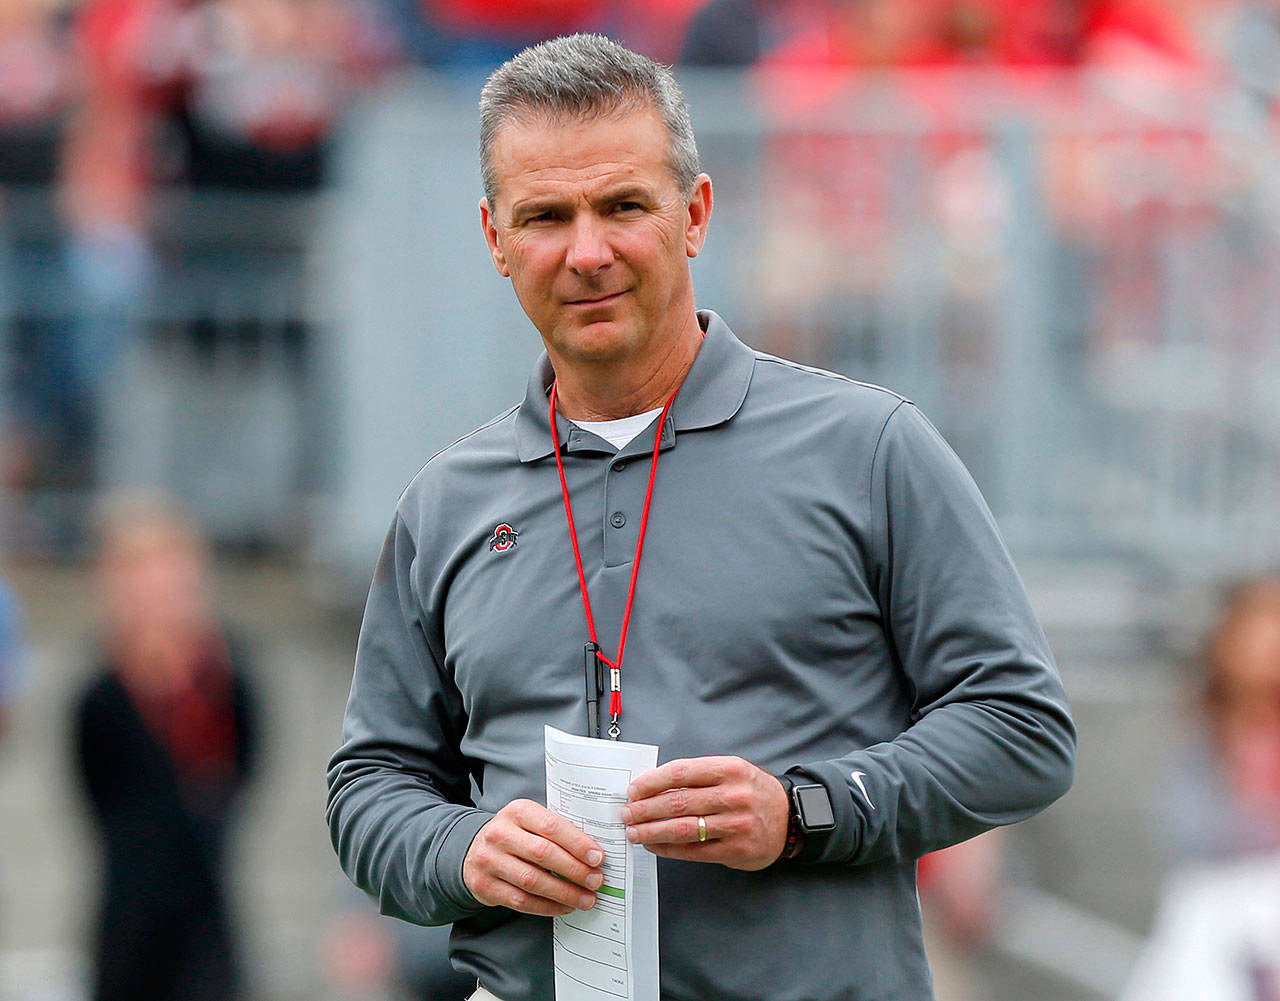 Ohio State football coach Urban Meyer watches the Buckeyes’ spring game April 14 in Columbus, Ohio. The school placed Meyer on paid administrative leave Wednesday. (AP Photo/Jay LaPrete, File)